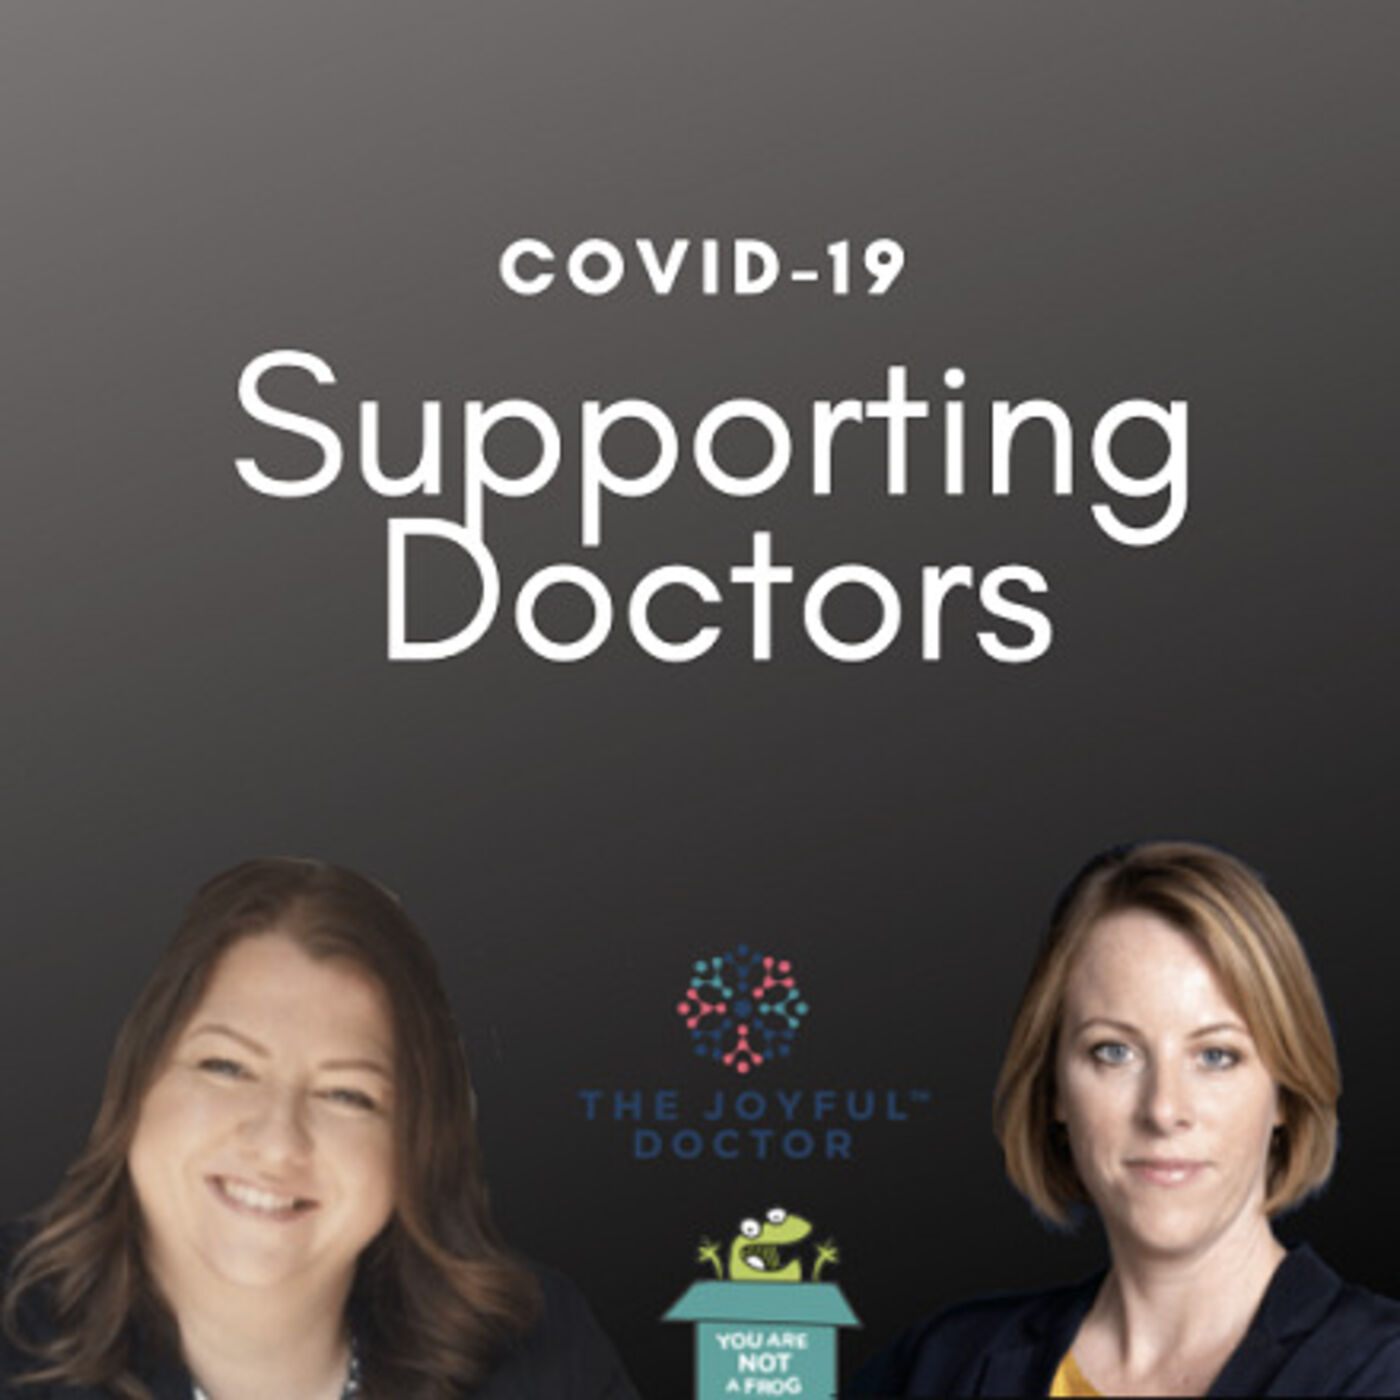 COVID-19 Supporting Doctors. COVID boredom – What Should We Do?